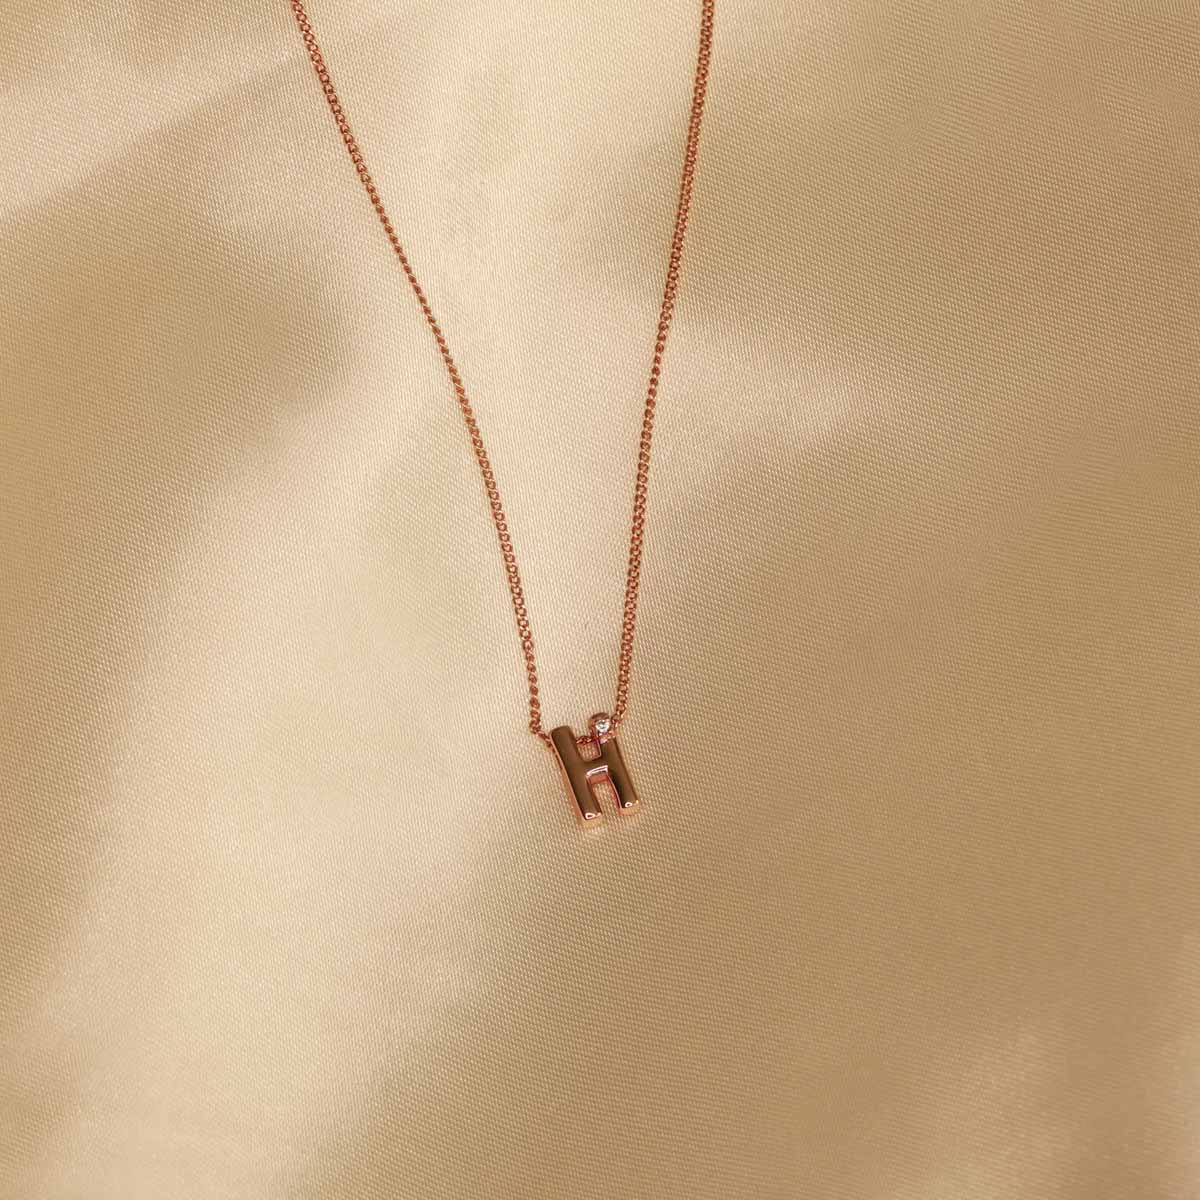 Flat lay shot of H Initial Pendant Necklace in Rose Gold